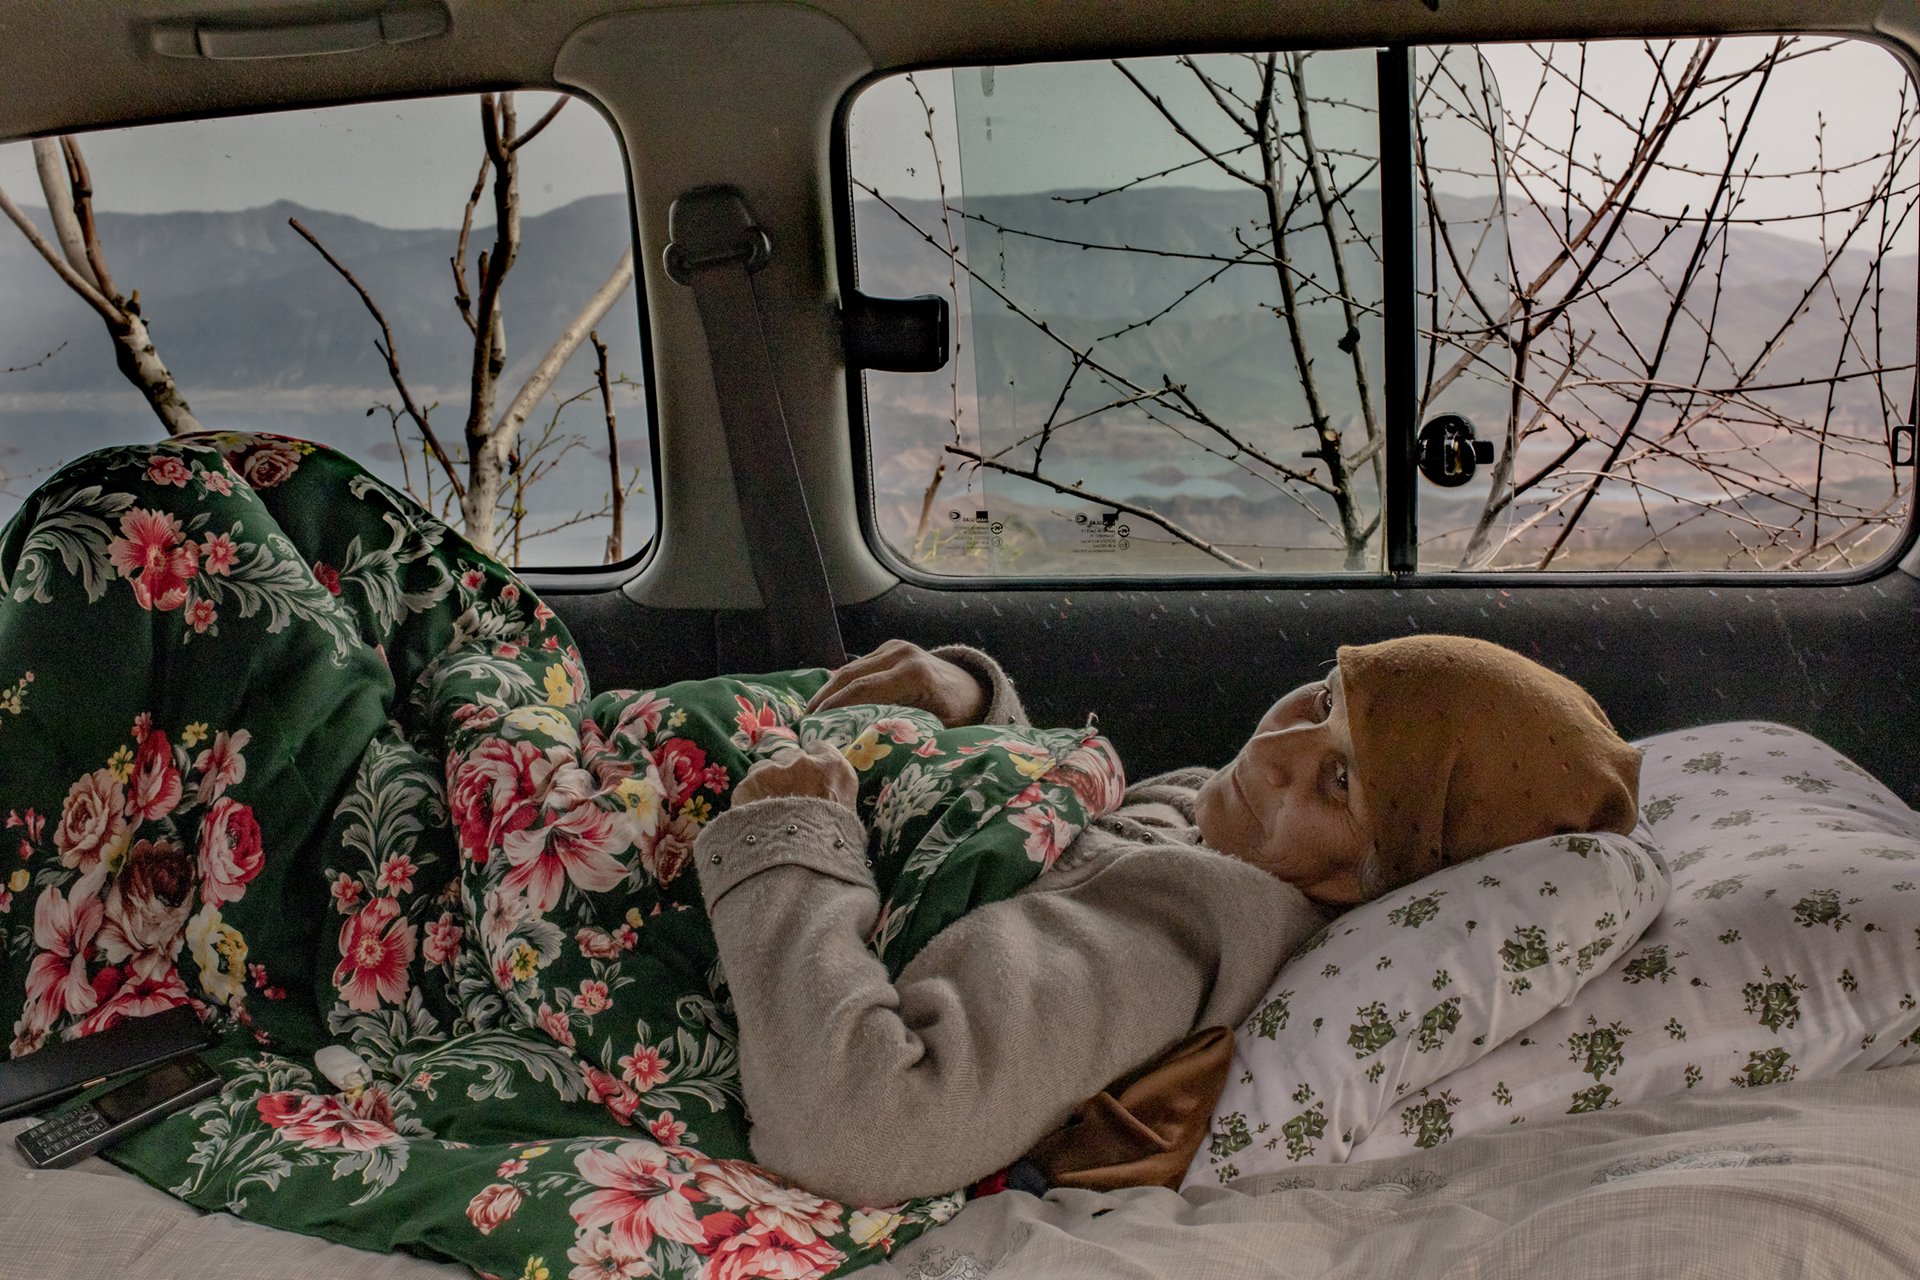 Ranobi Islomova (63), who is ill, waits to be taken to a nearby town, in a car beside the Norak Reservoir in south-eastern Tajikistan.